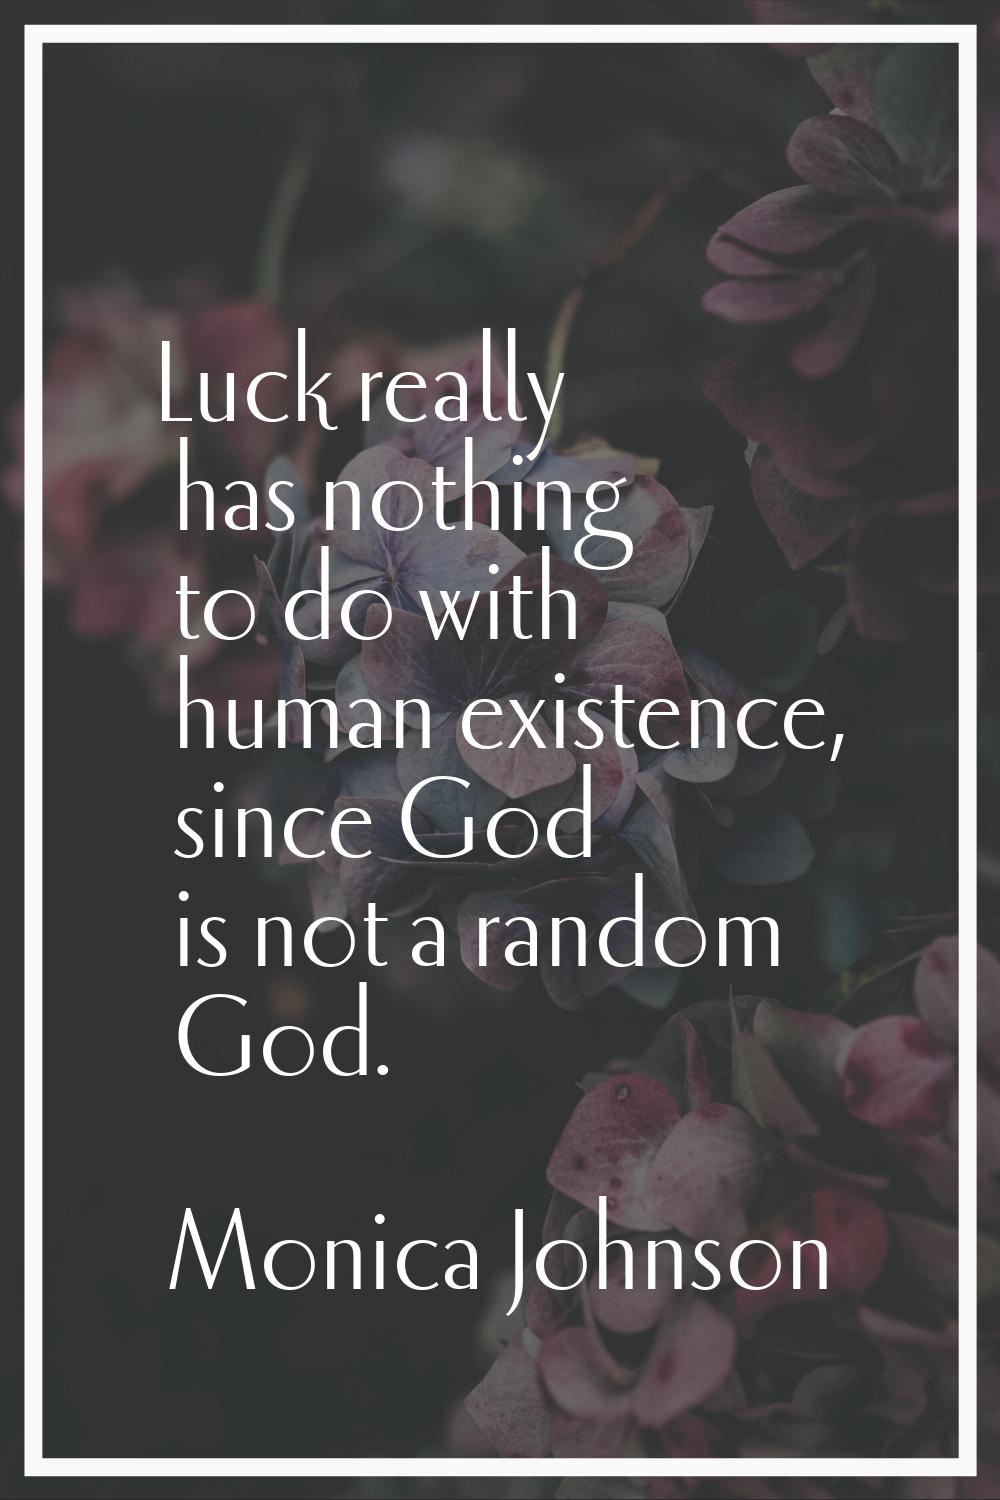 Luck really has nothing to do with human existence, since God is not a random God.